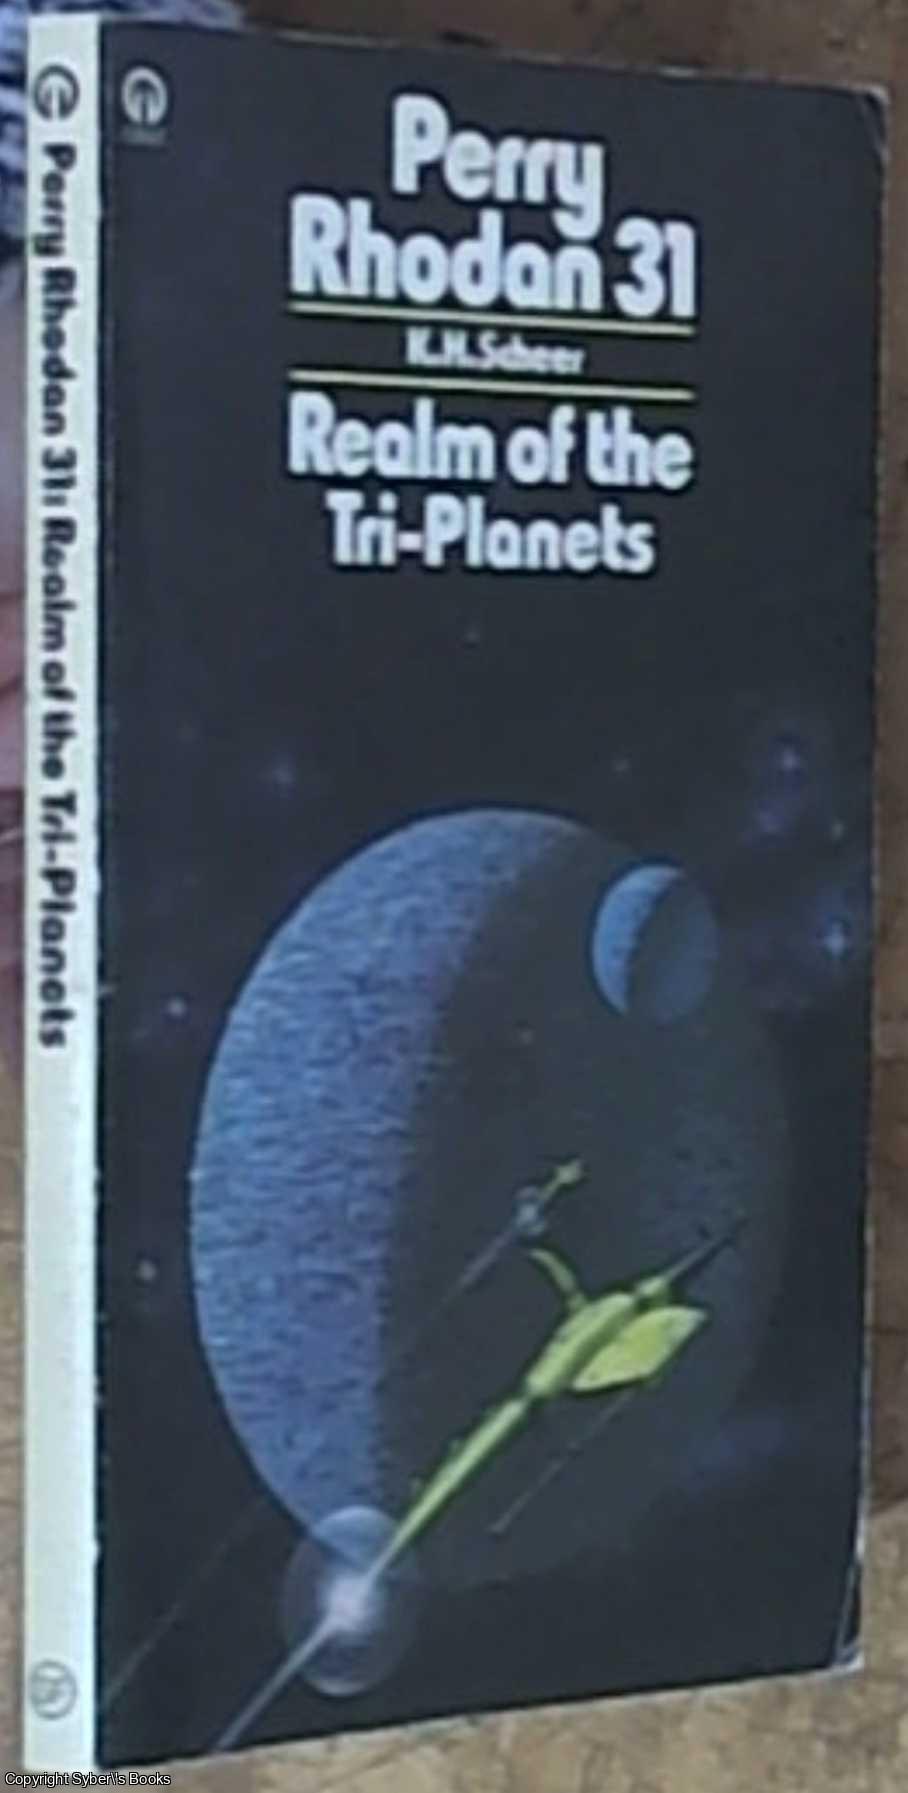 Sheer, K. H. - Realm of the Tri-Planets - Perry Rhodan Series #31